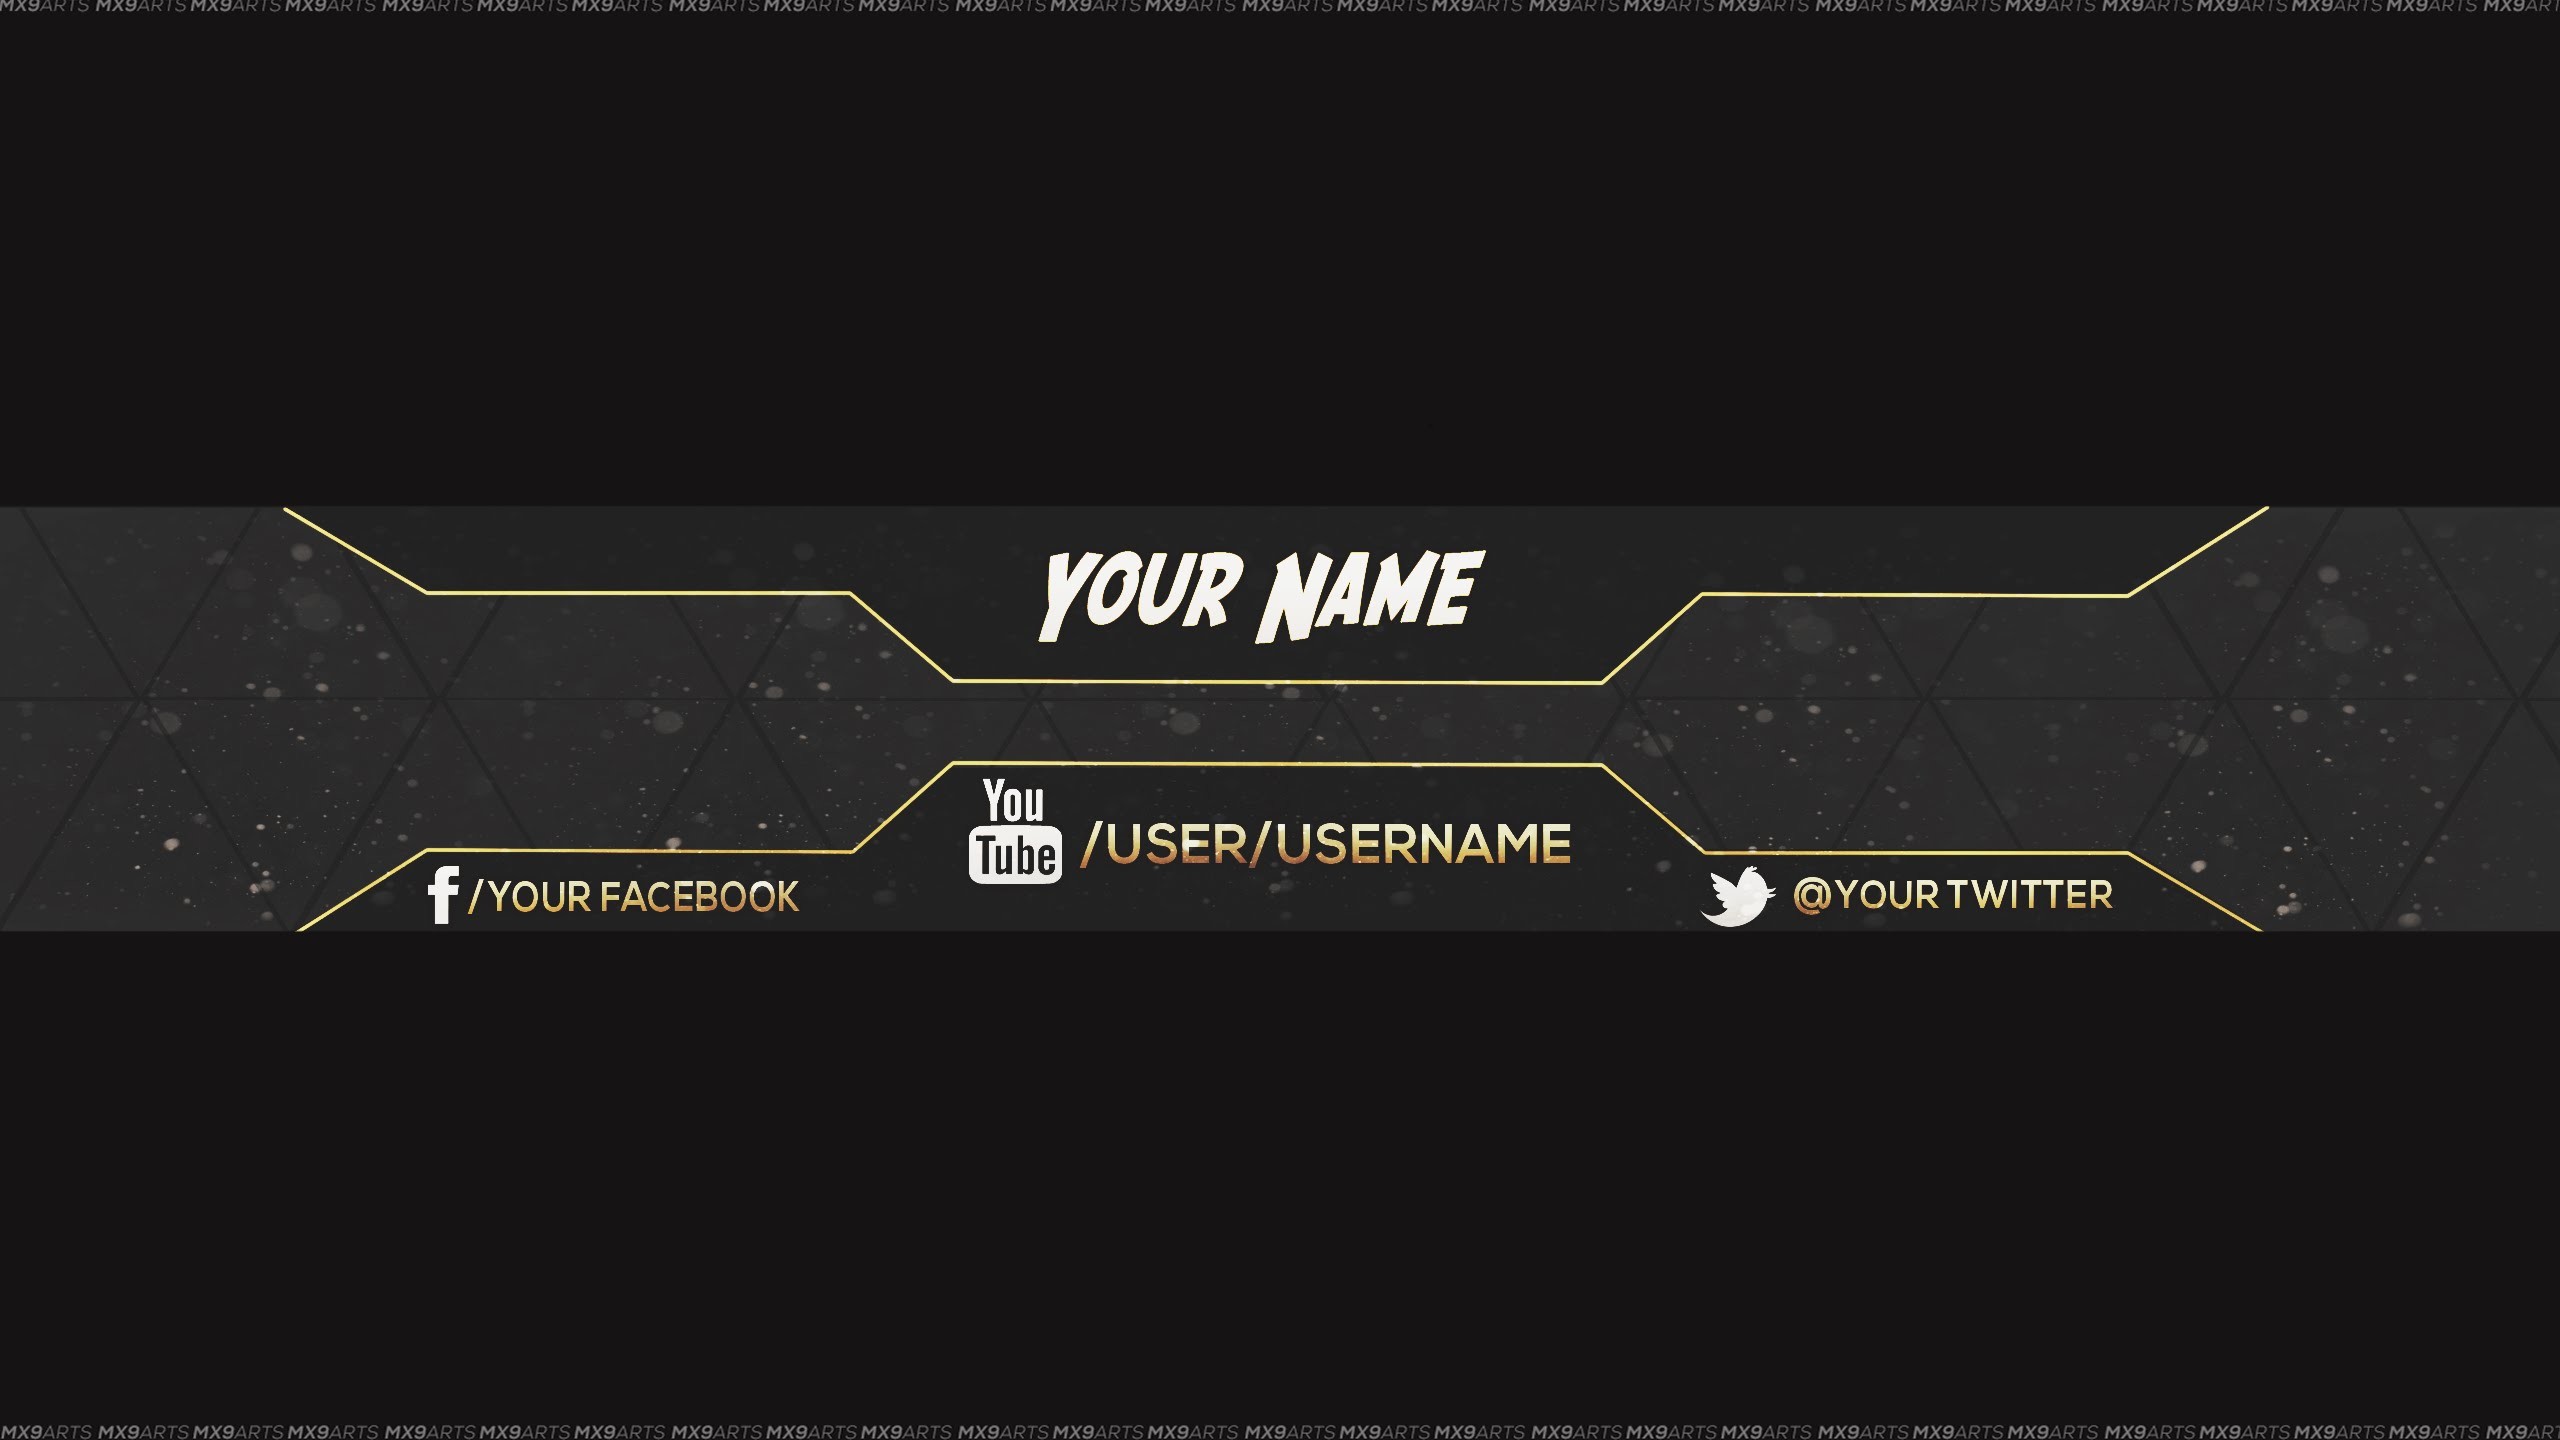 2560x1440 [REUPLOAD] FREE Amazing Youtube Channel Banner Template #5 + Direct  Download Link - YouTube